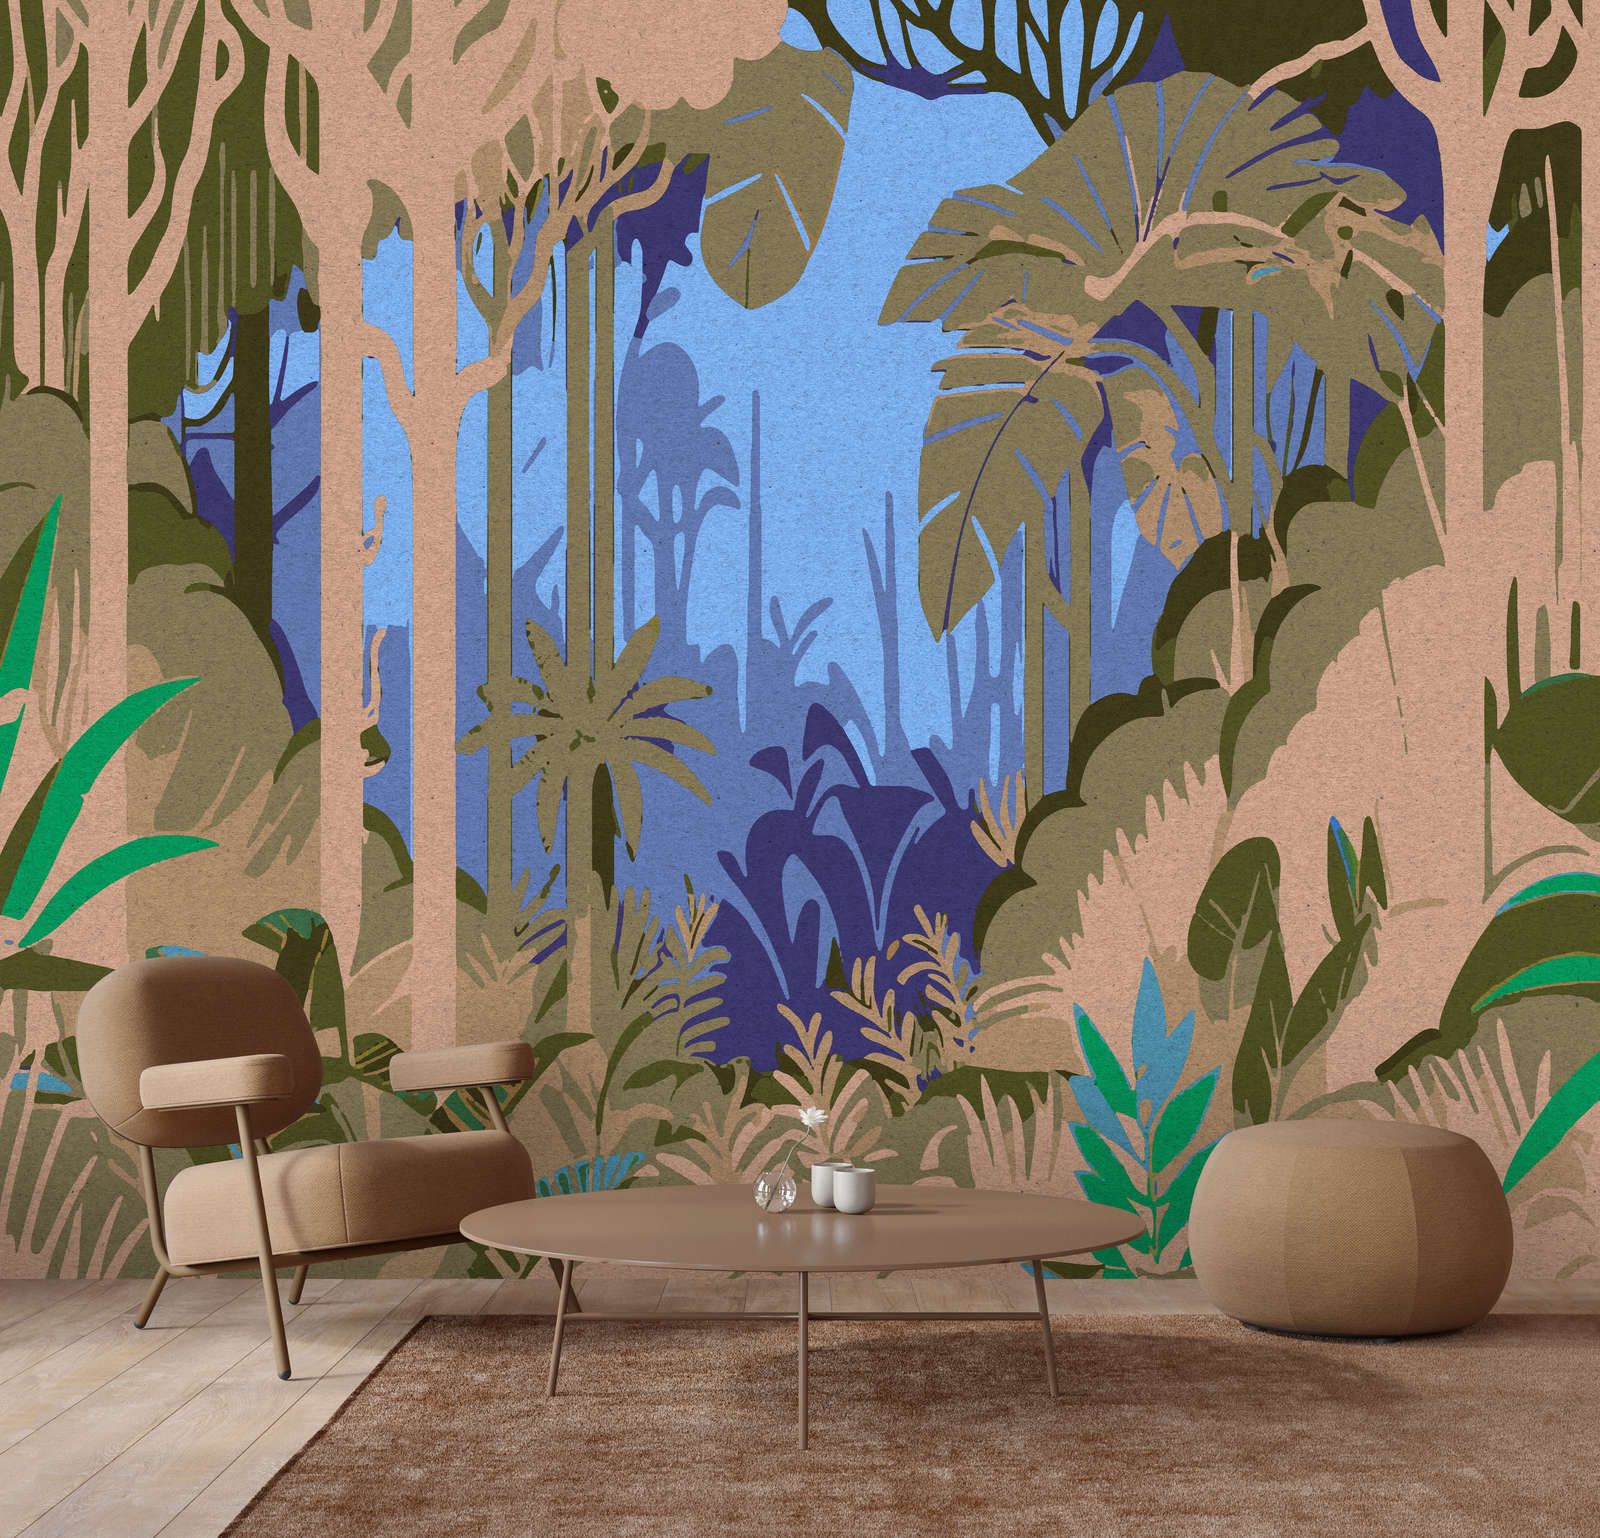             Photo wallpaper »azura« - Abstract jungle motif with kraft paper texture - Smooth, slightly pearlescent non-woven fabric
        